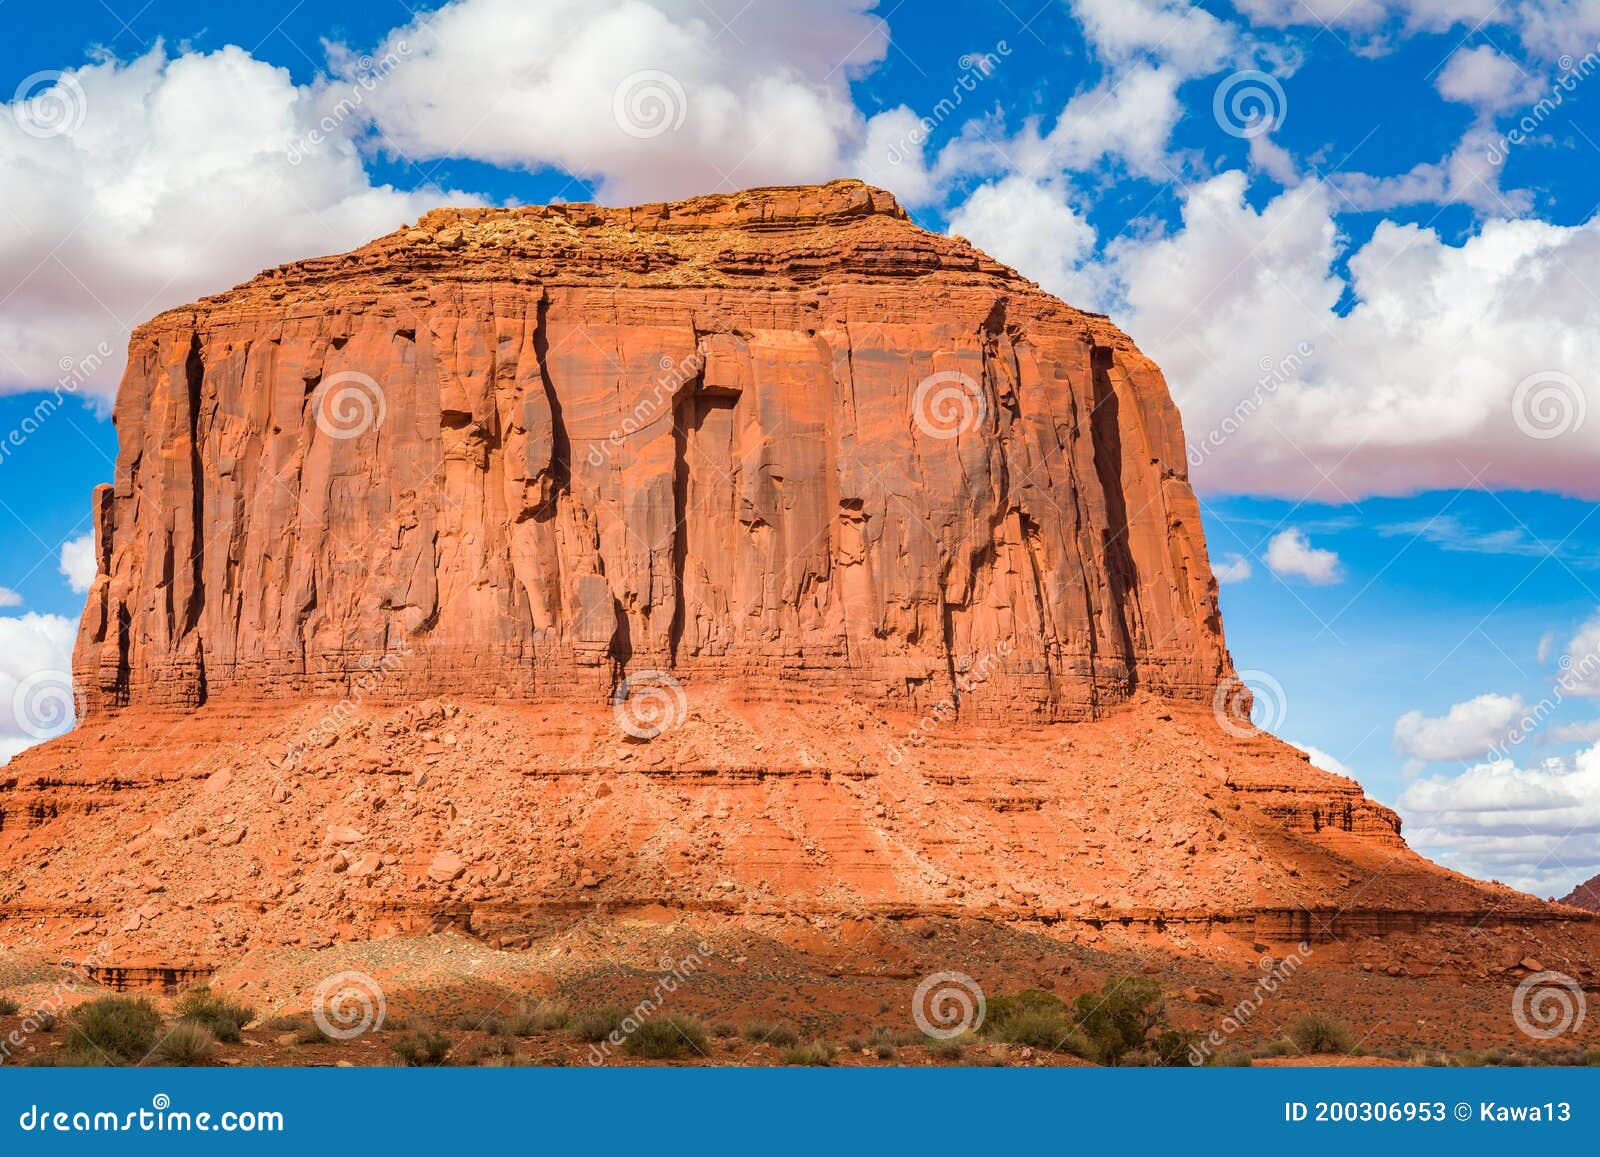 Big Rocks of Monument Valley. Stock Image - of three: 200306953